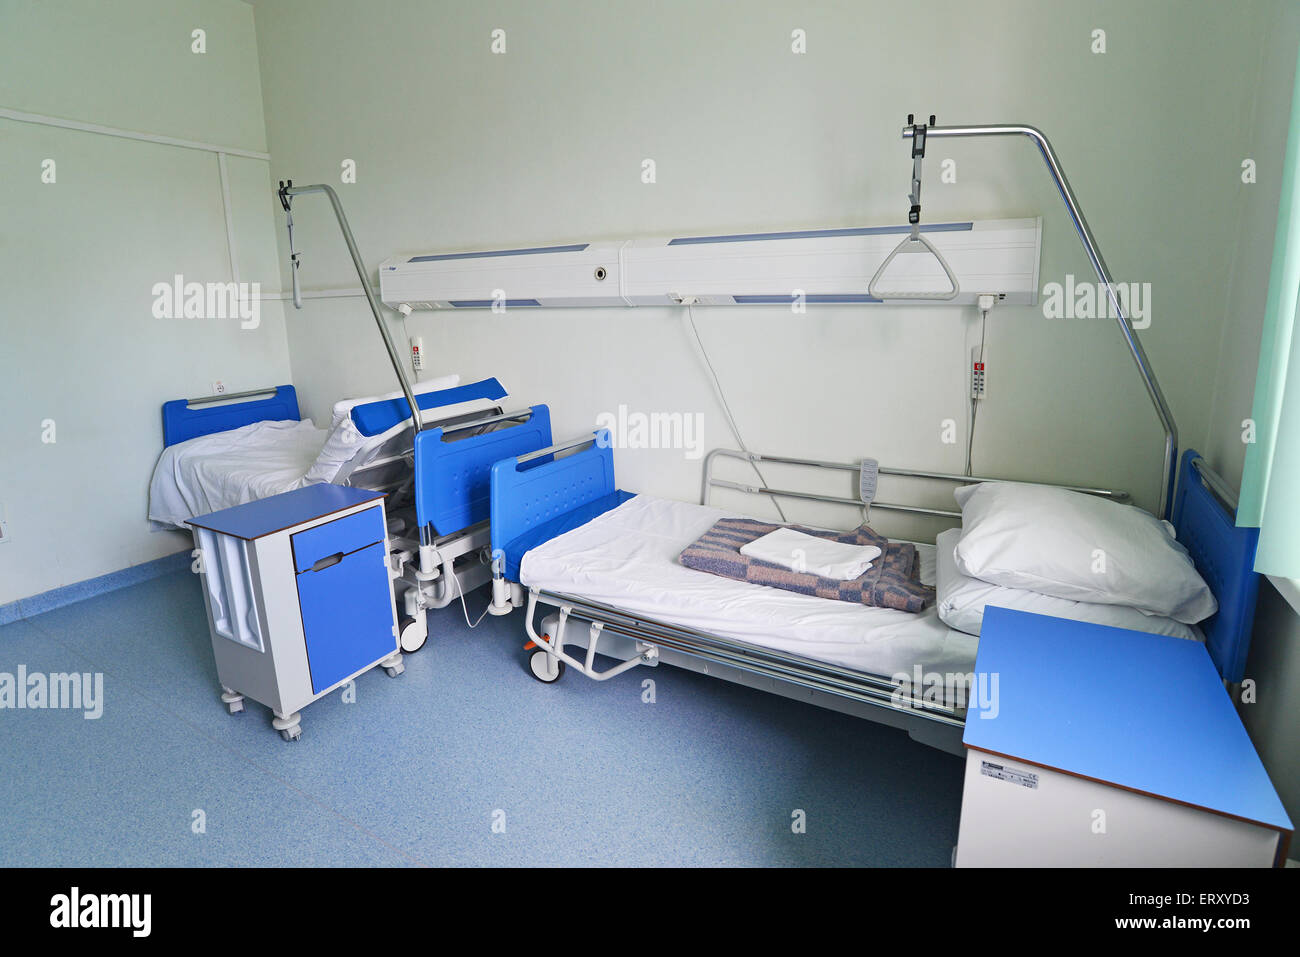 Hospital beds in a private hospital ward Stock Photo